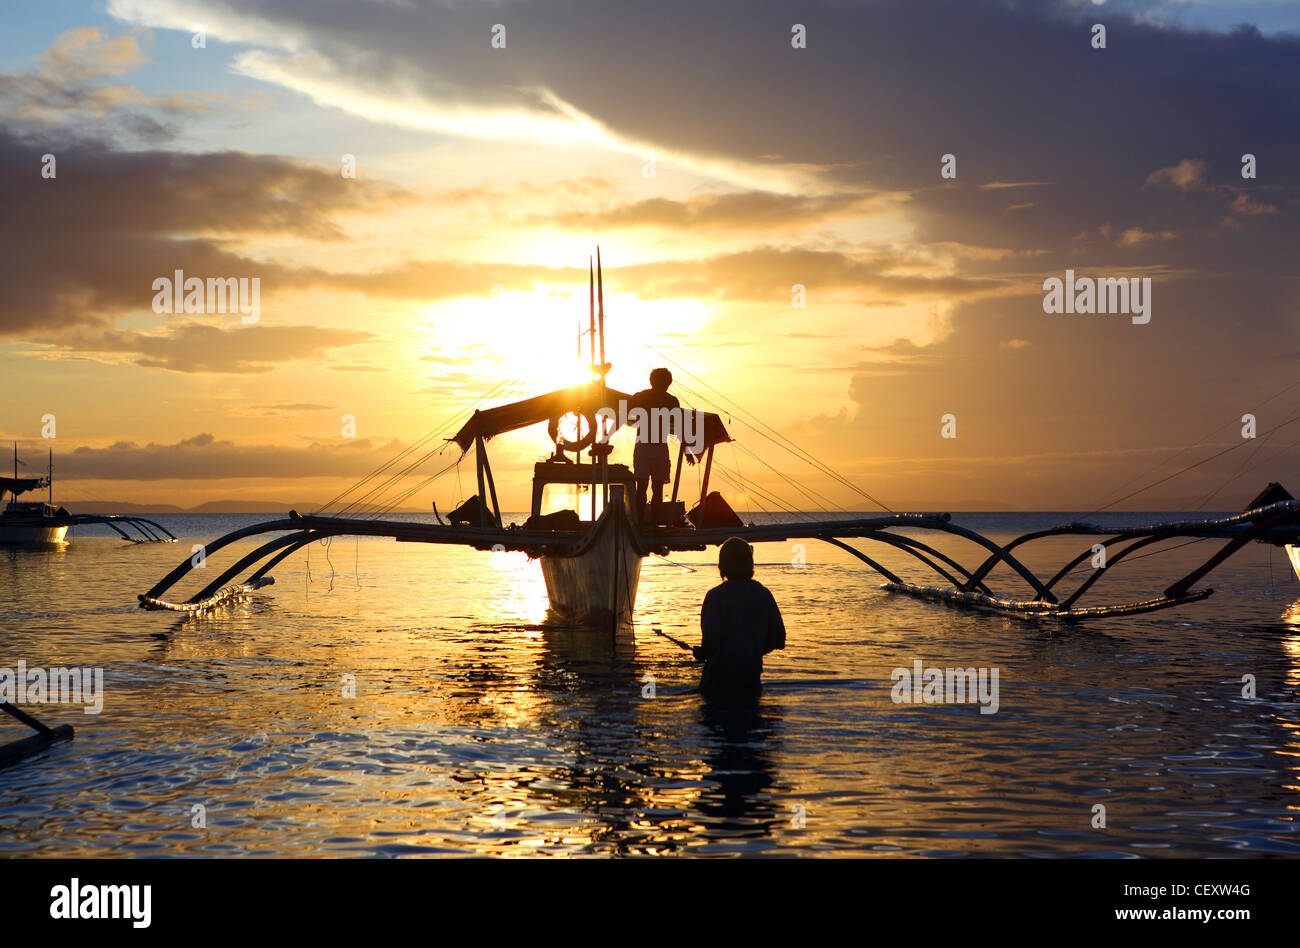 Fishermen on outrigger fishing boat at sunset. Donsol, Sorsogon, Luzon, Albay, Bicol, Philippines, South-East Asia, Asia Stock Photo